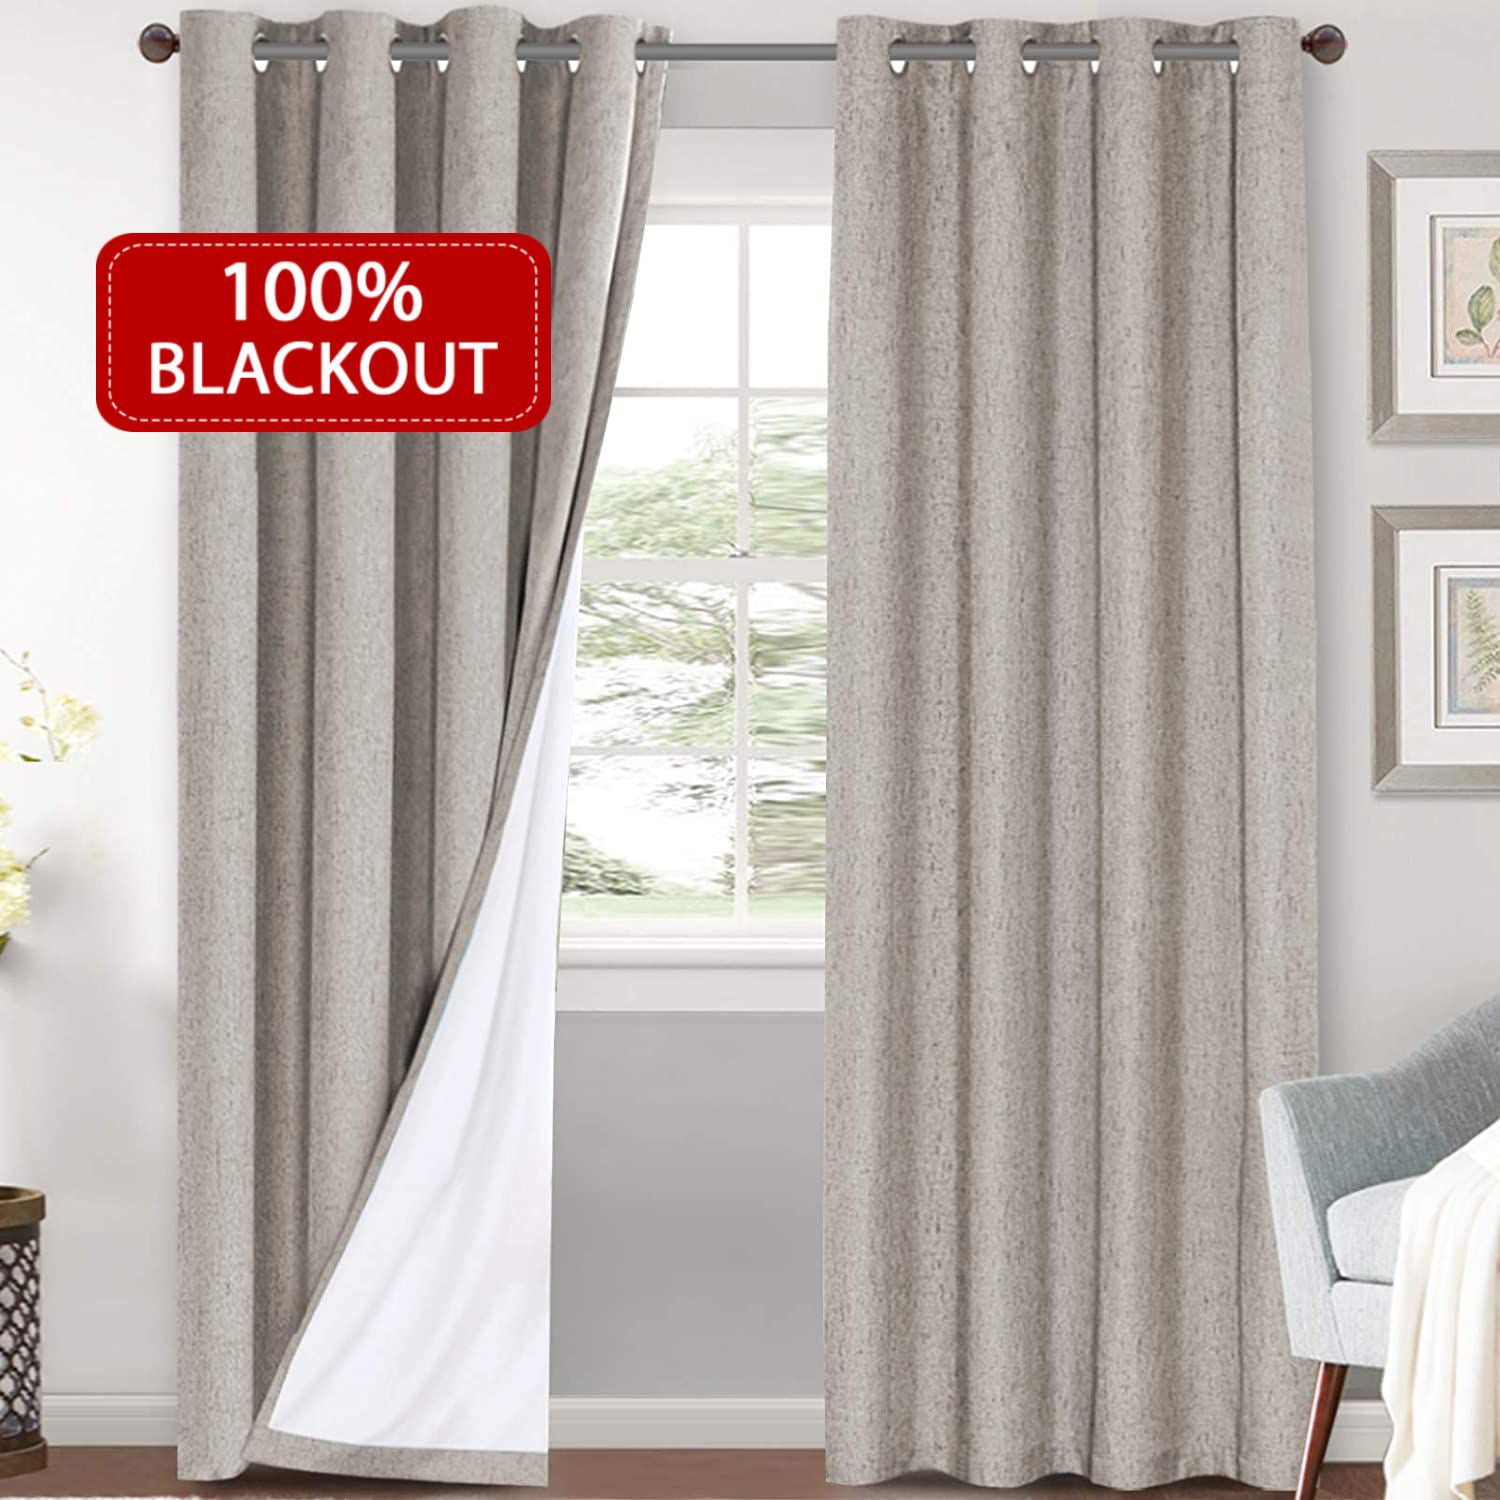 Linen Blackout Curtains 96 Inches Long 100% Total Blackout Heavy-Duty